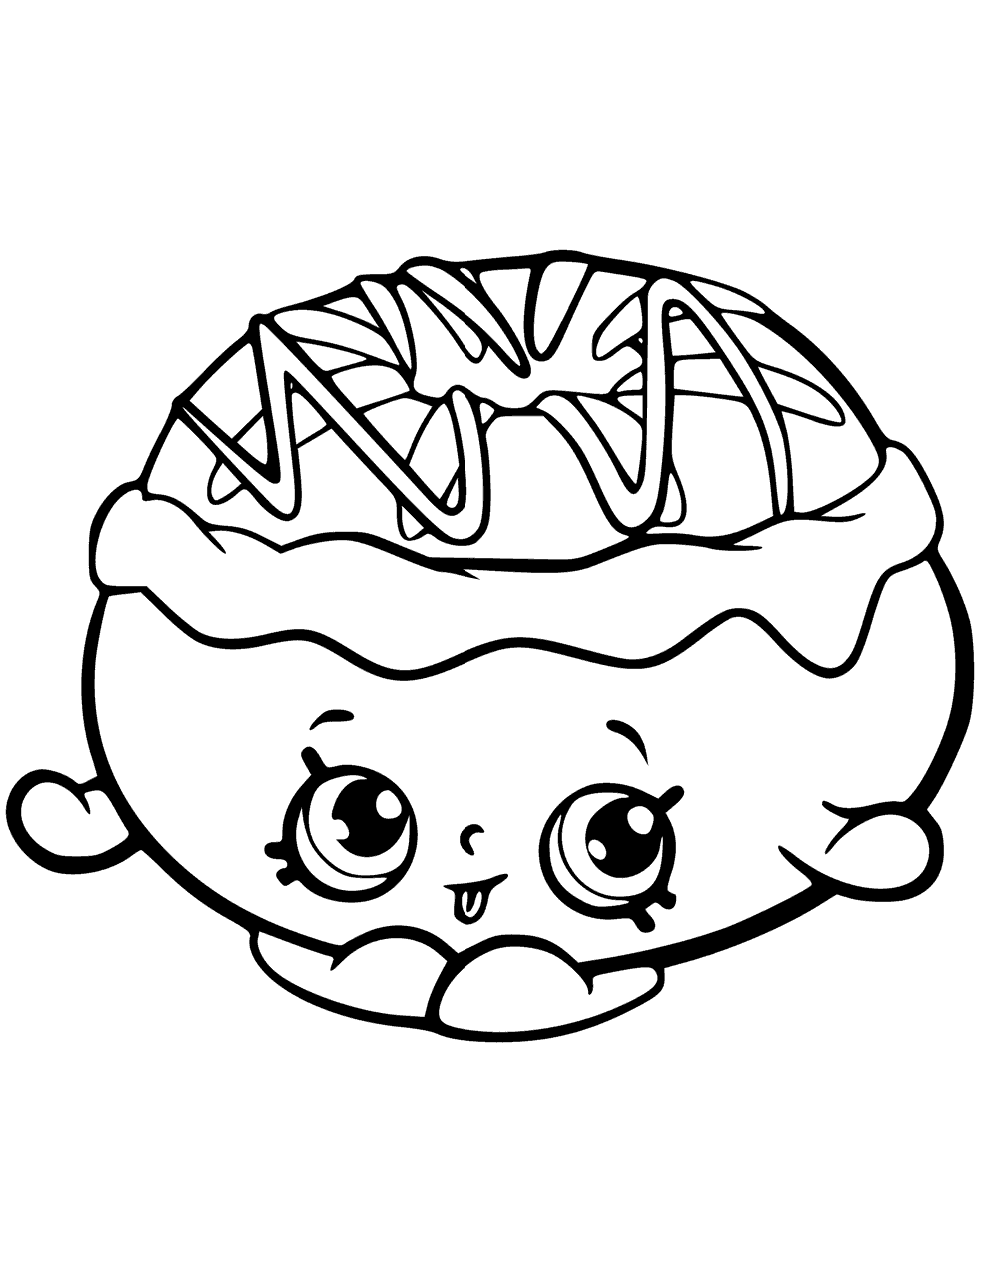 Cute Donut Shopkins Coloring Page   Free Printable Coloring Pages ...